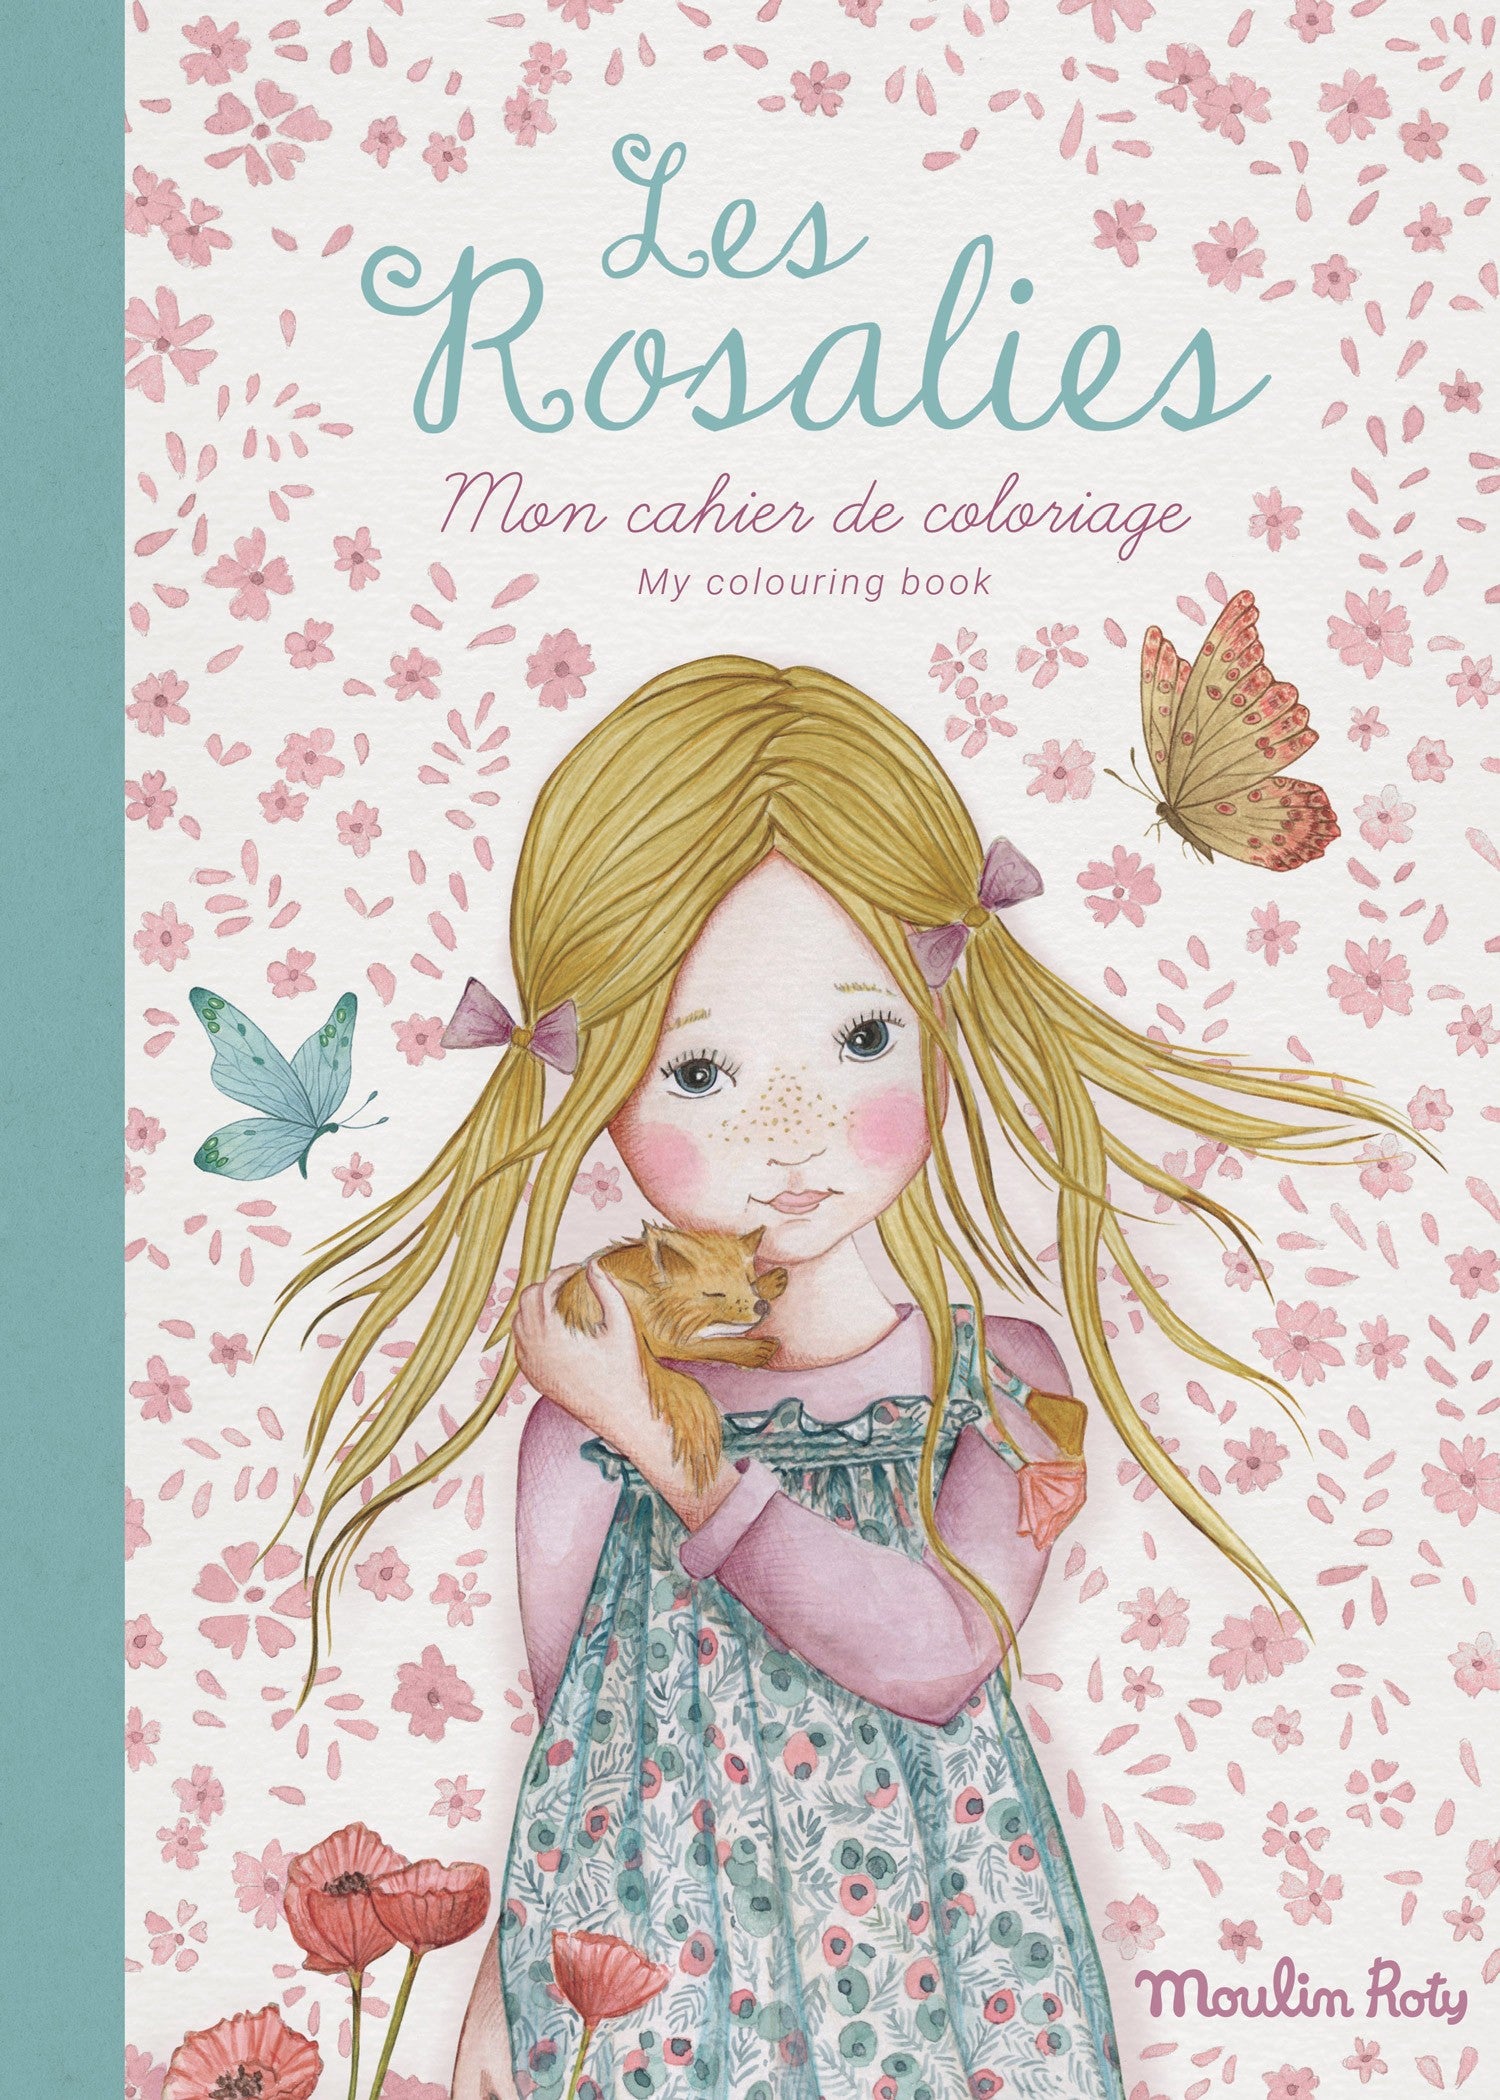 Moulin Roty Les Rosalies Coloring Book 710539